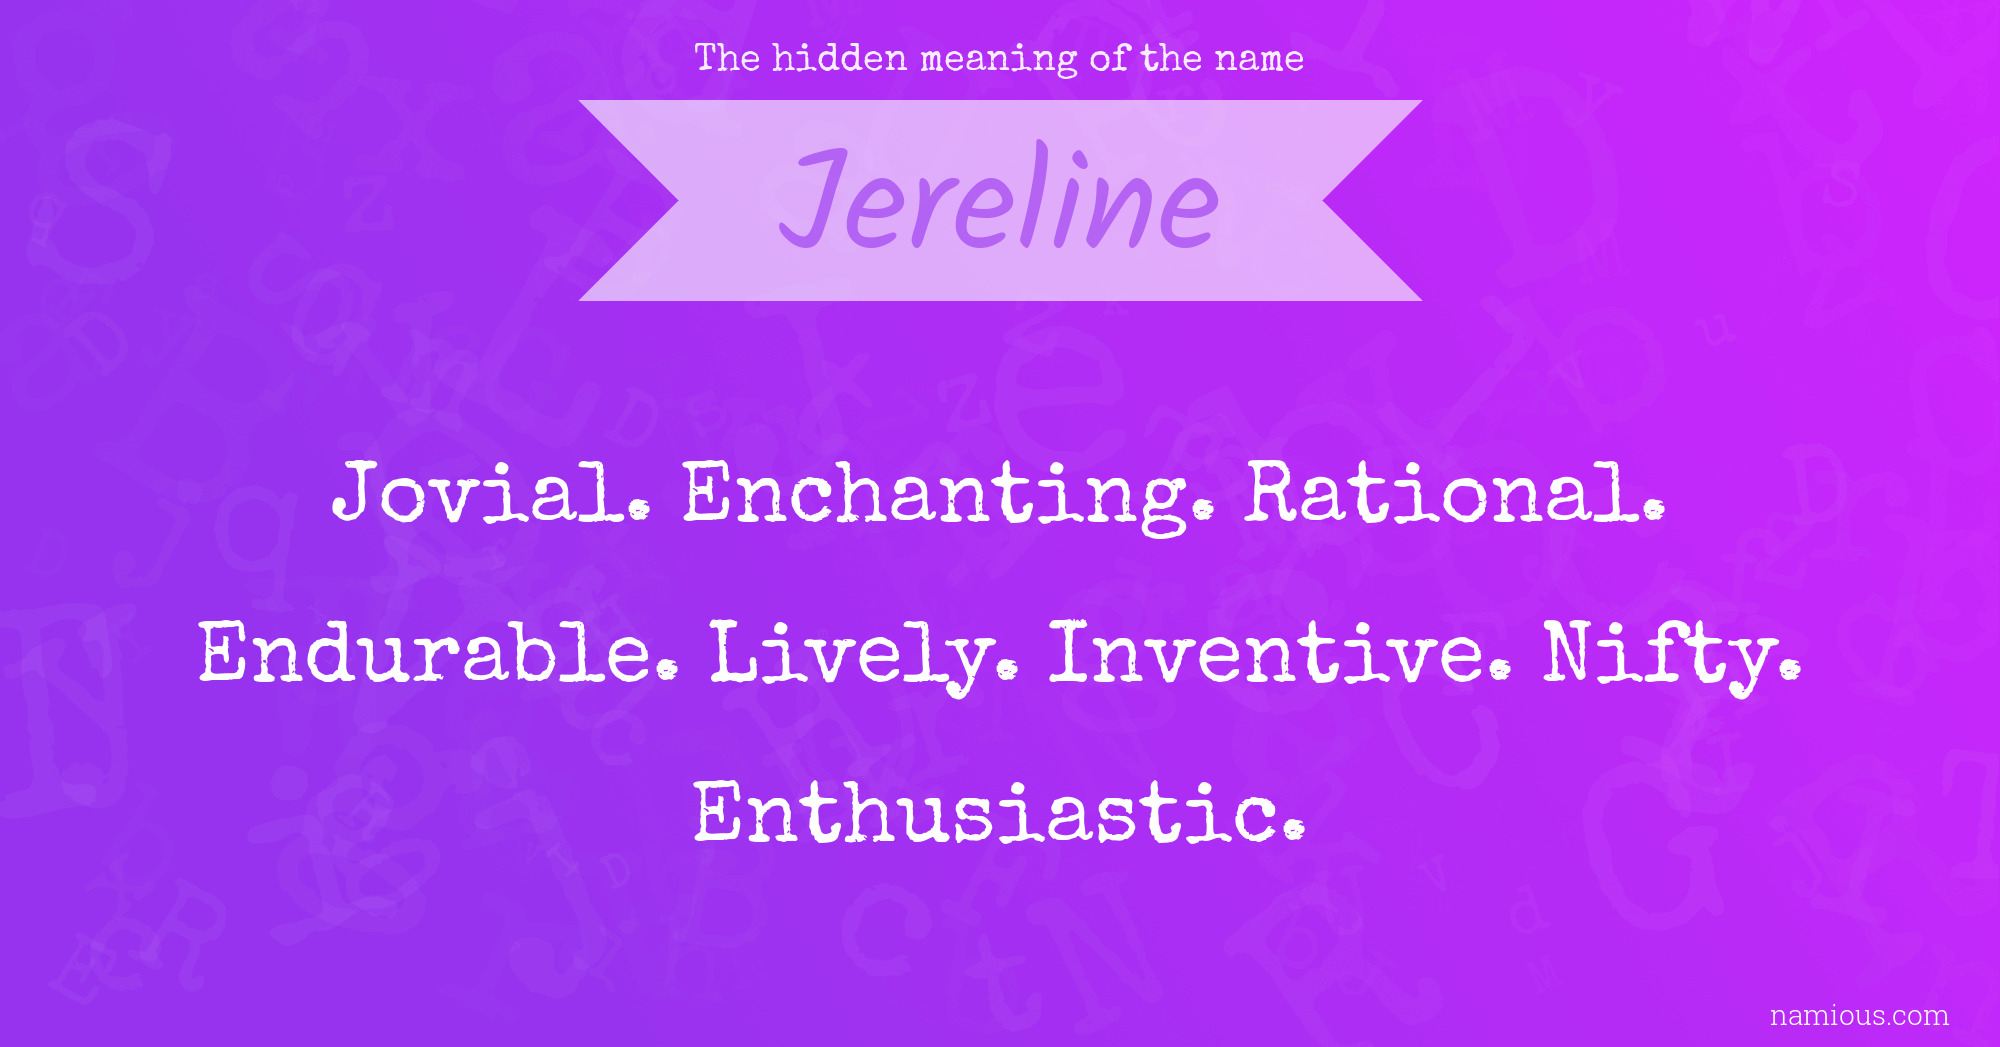 The hidden meaning of the name Jereline